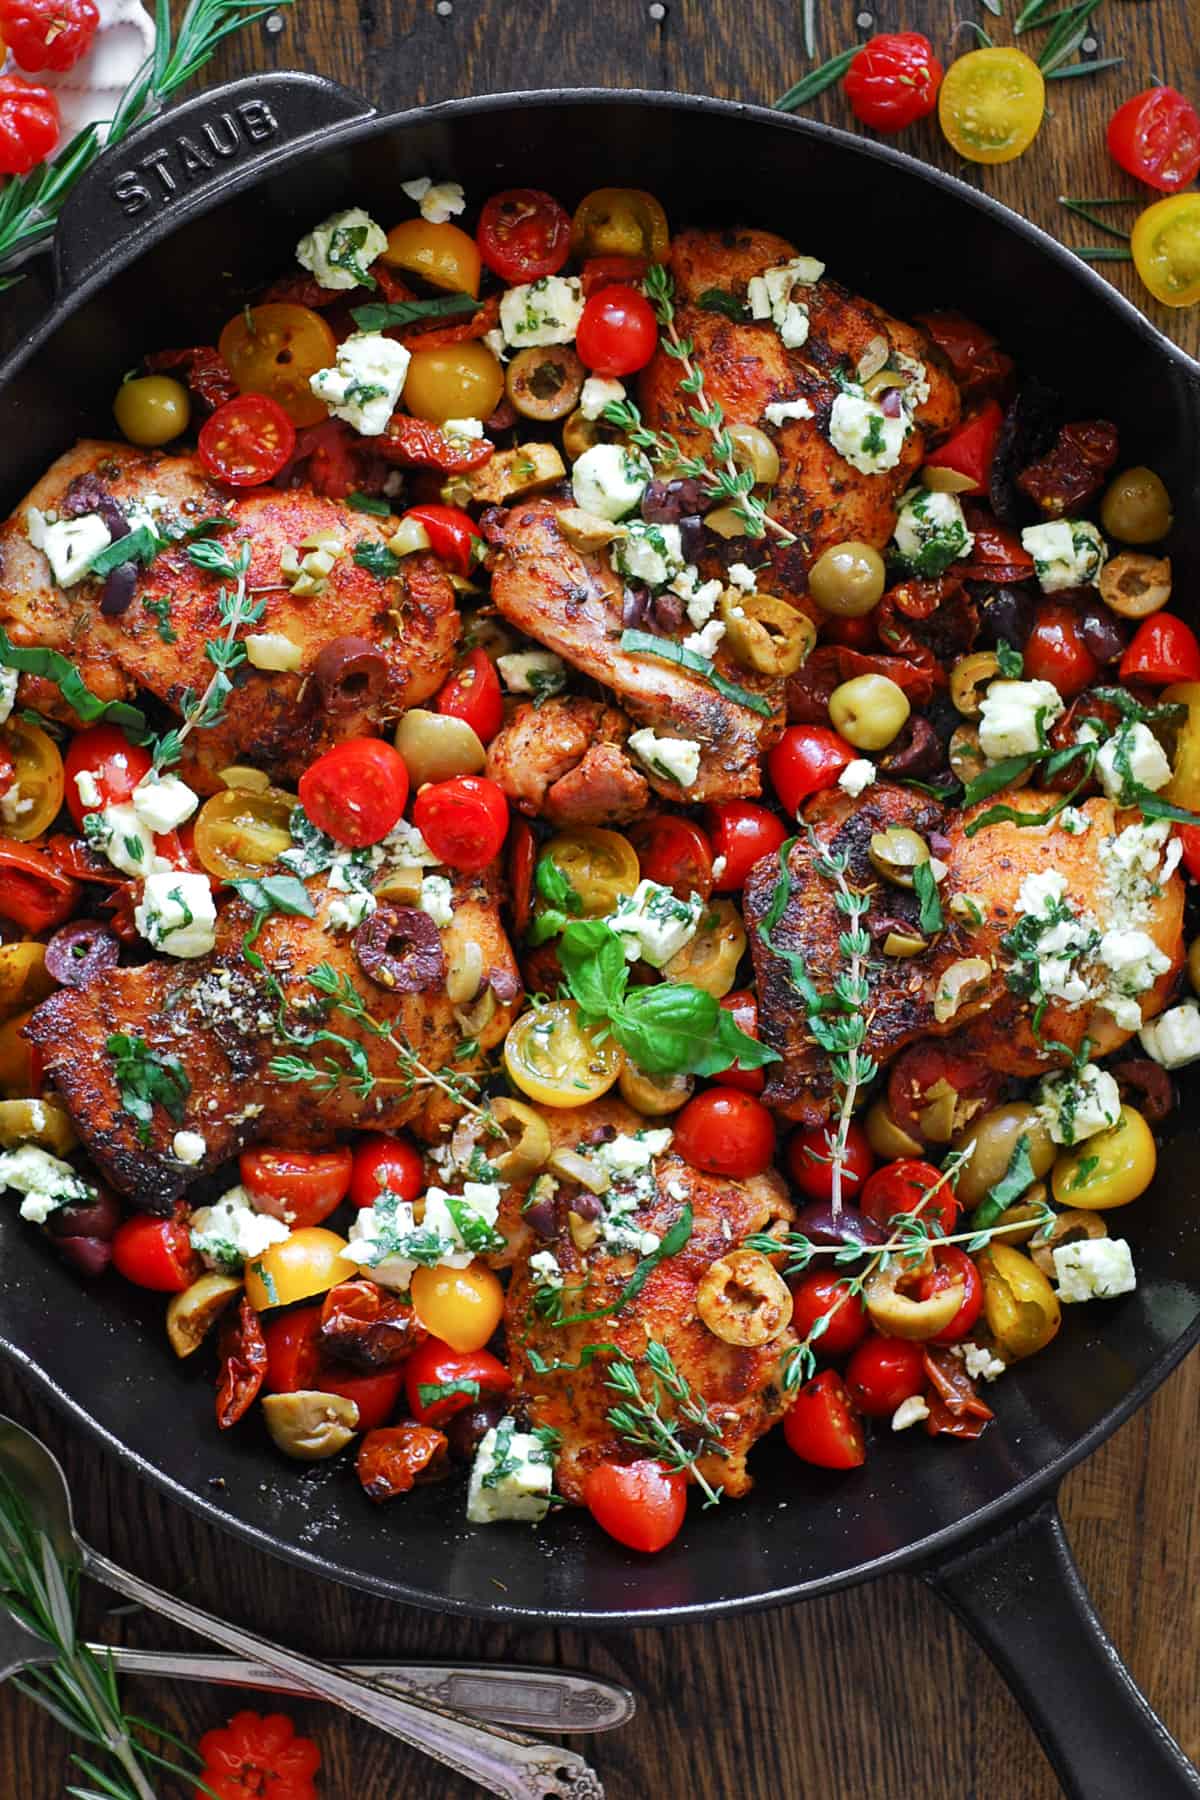 Greek Chicken with Tomatoes, Olives, Sun-Dried Tomatoes, and Feta Cheese - in a cast iron skillet.